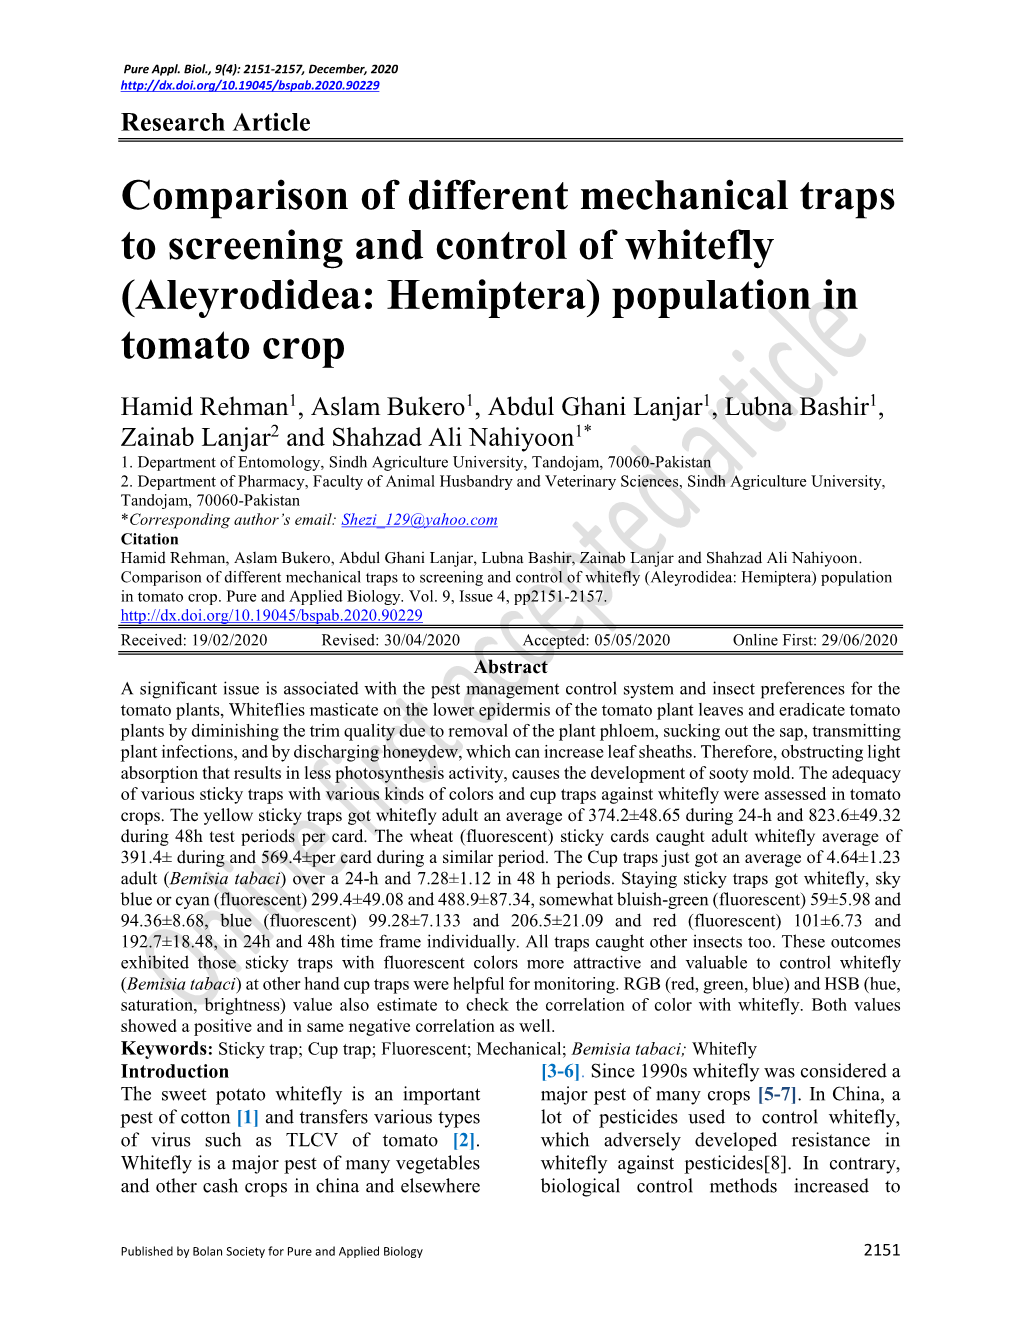 Comparison of Different Mechanical Traps to Screening and Control of Whitefly (Aleyrodidea: Hemiptera) Population in Tomato Crop